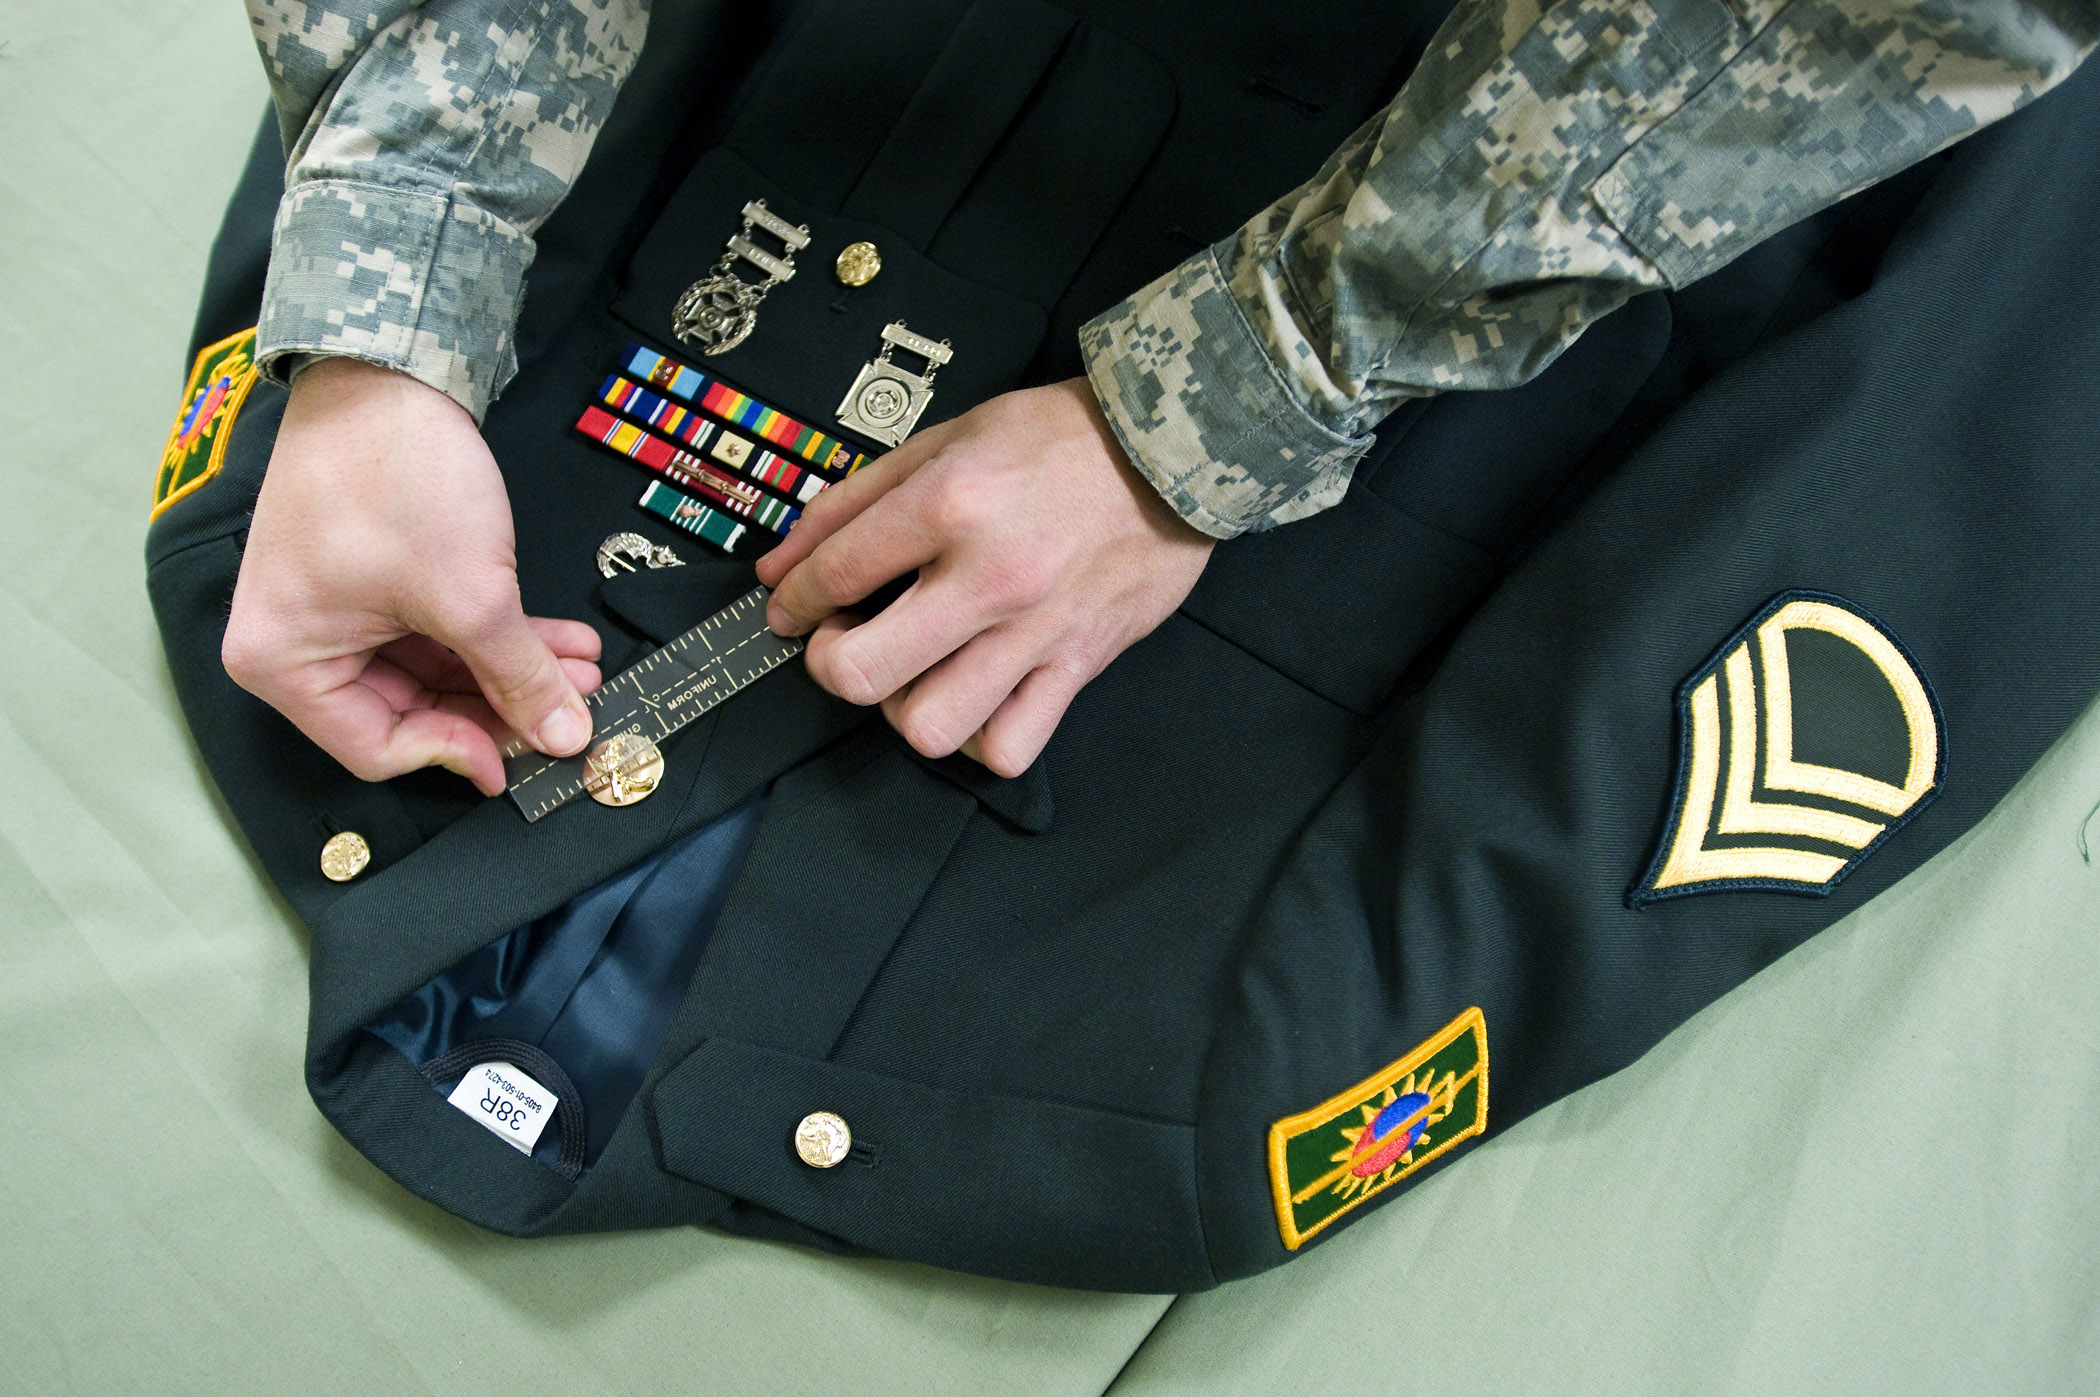 U.S. Army - Is your dress uniform ready? Part of Soldier... | Facebook